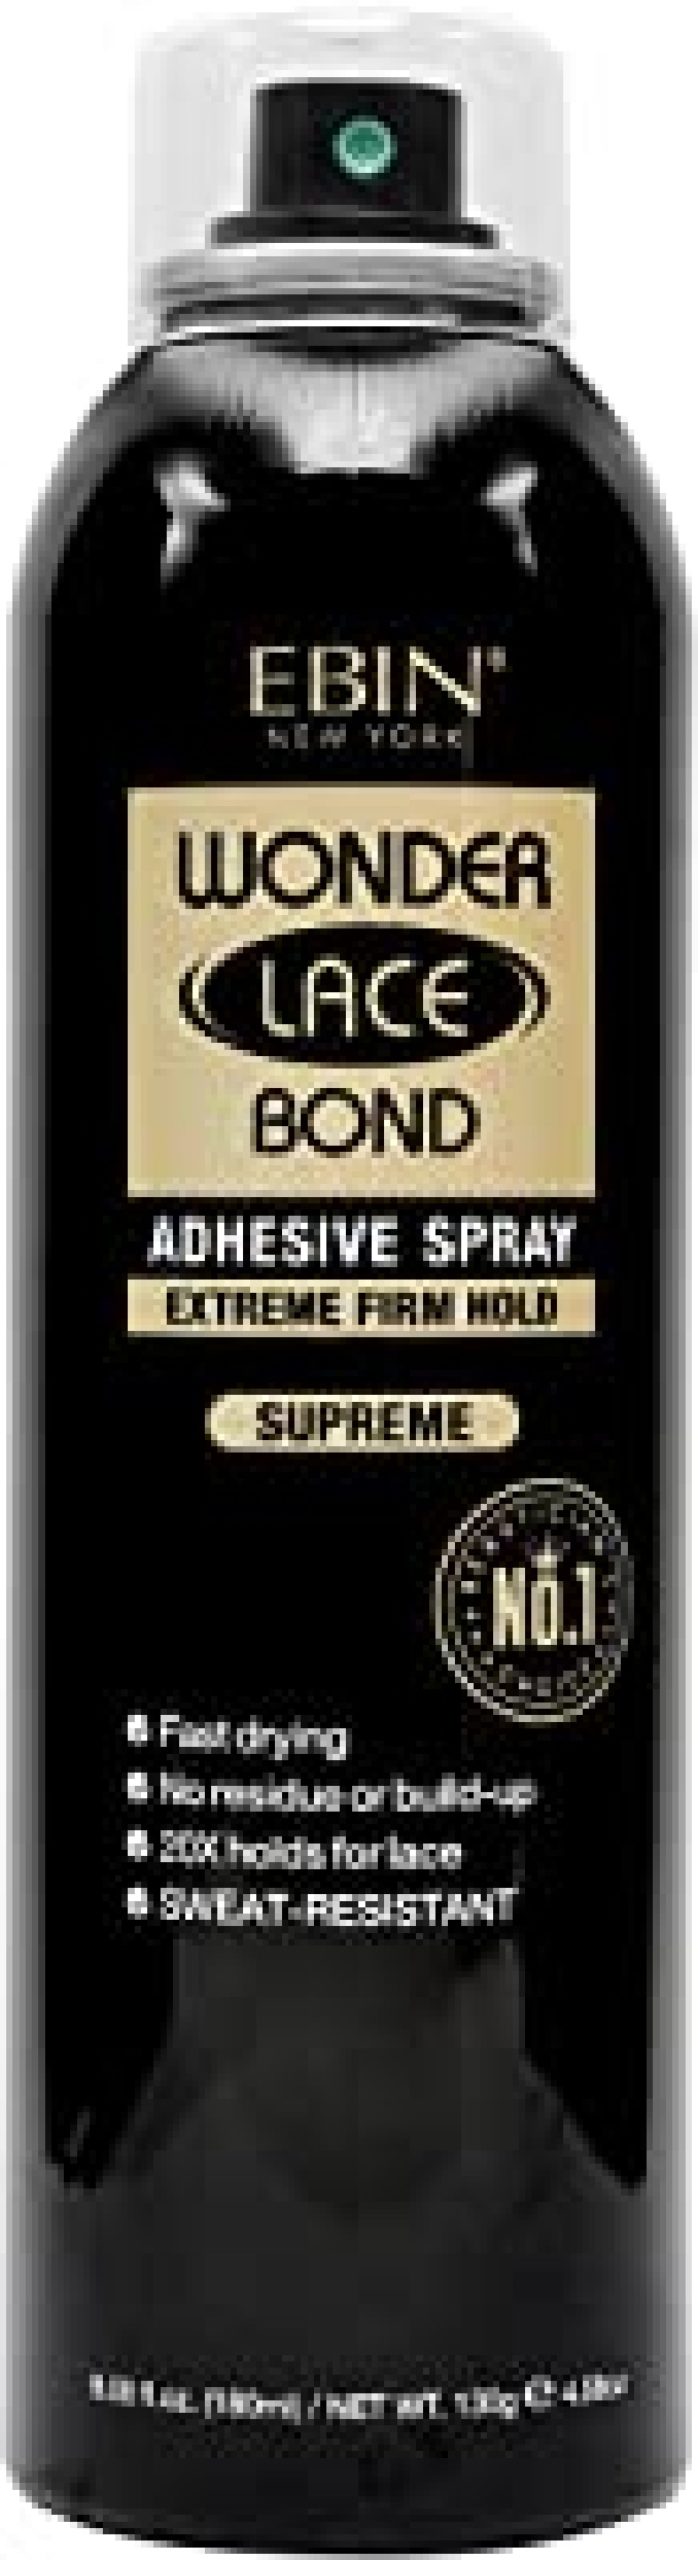 Ebin Wonder Lace Bond Adhesive Spray – Welcome to Supreme Styles